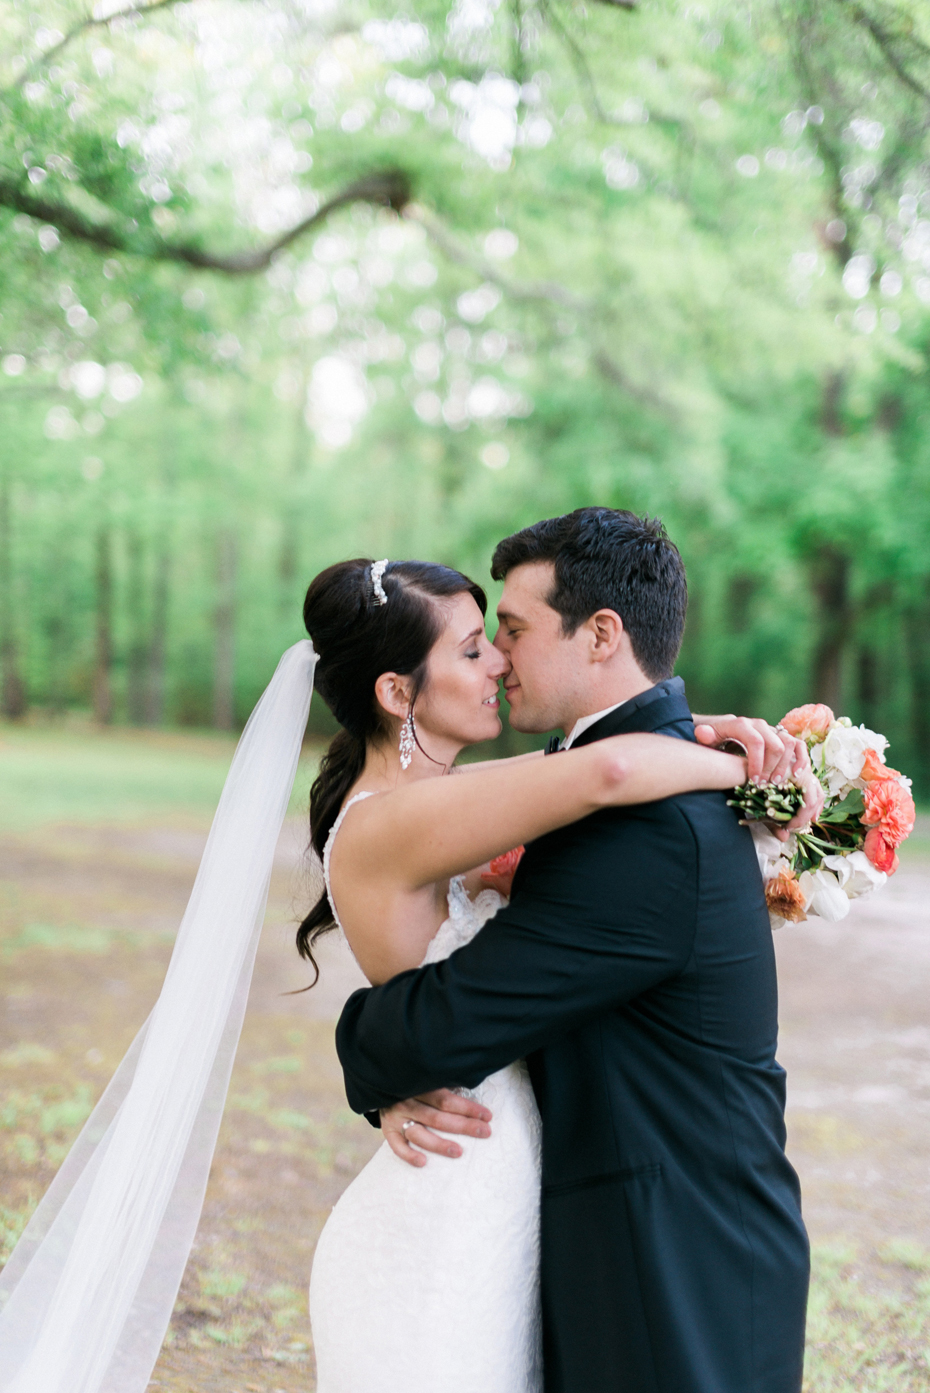 Bride and groom share a kiss at the Noland Trail by Virginia Wedding Photographer, Heather Jowett.